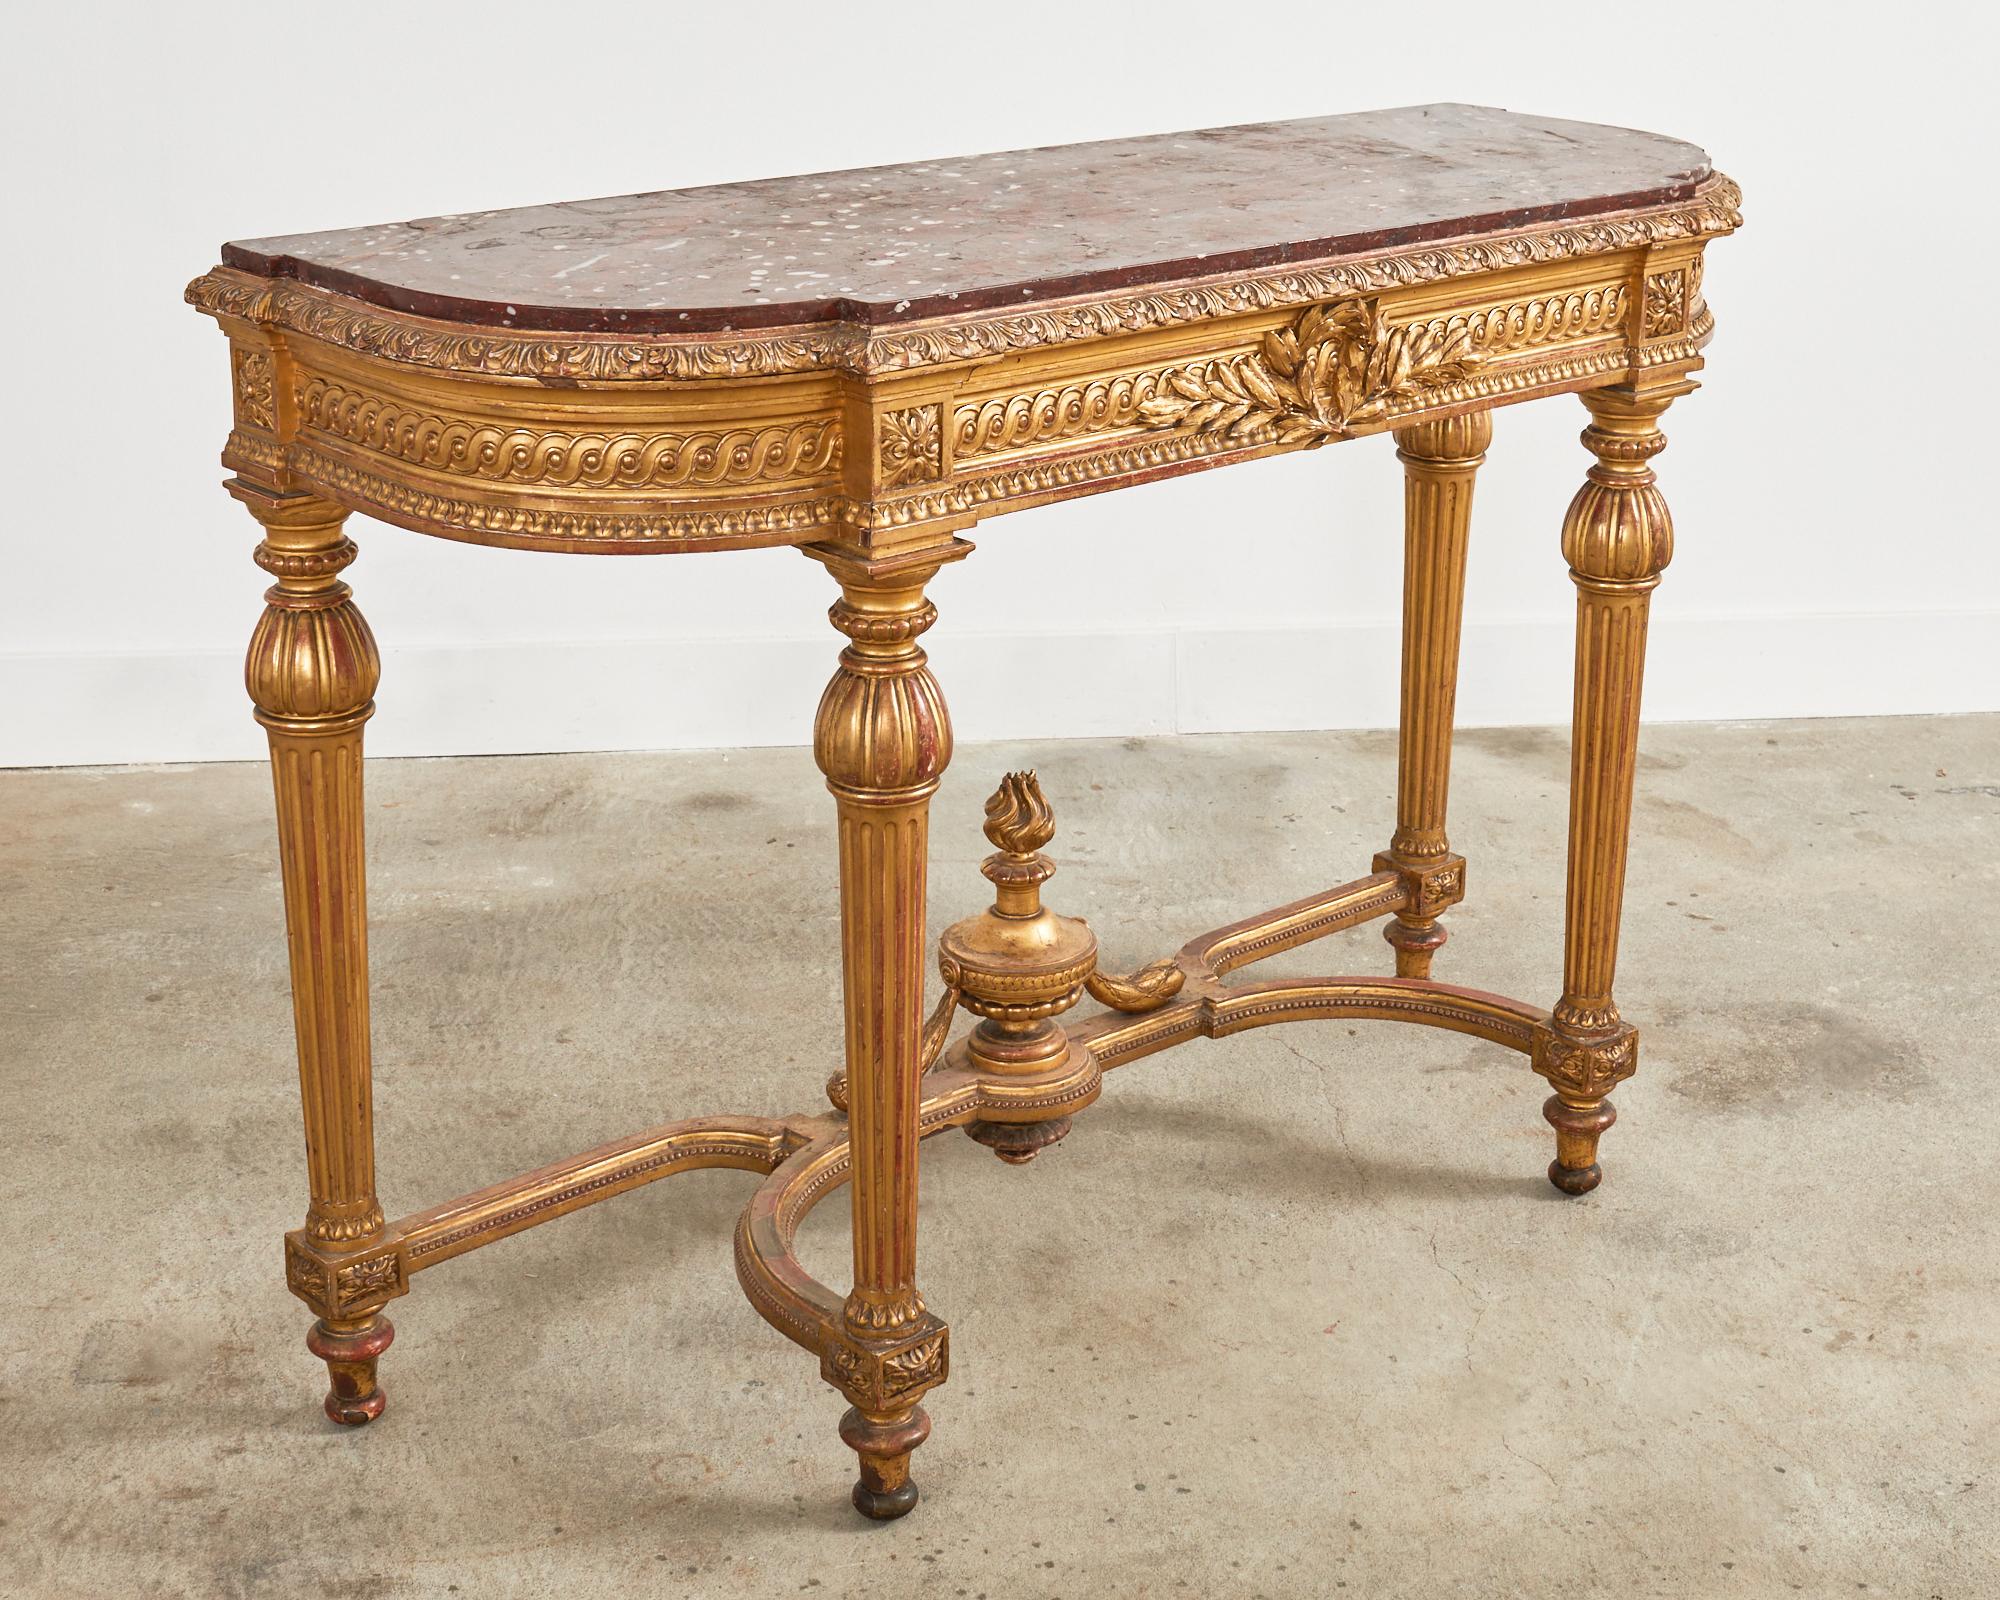 19th Century French Empire Neoclassical Marble Top Console Table For Sale 1